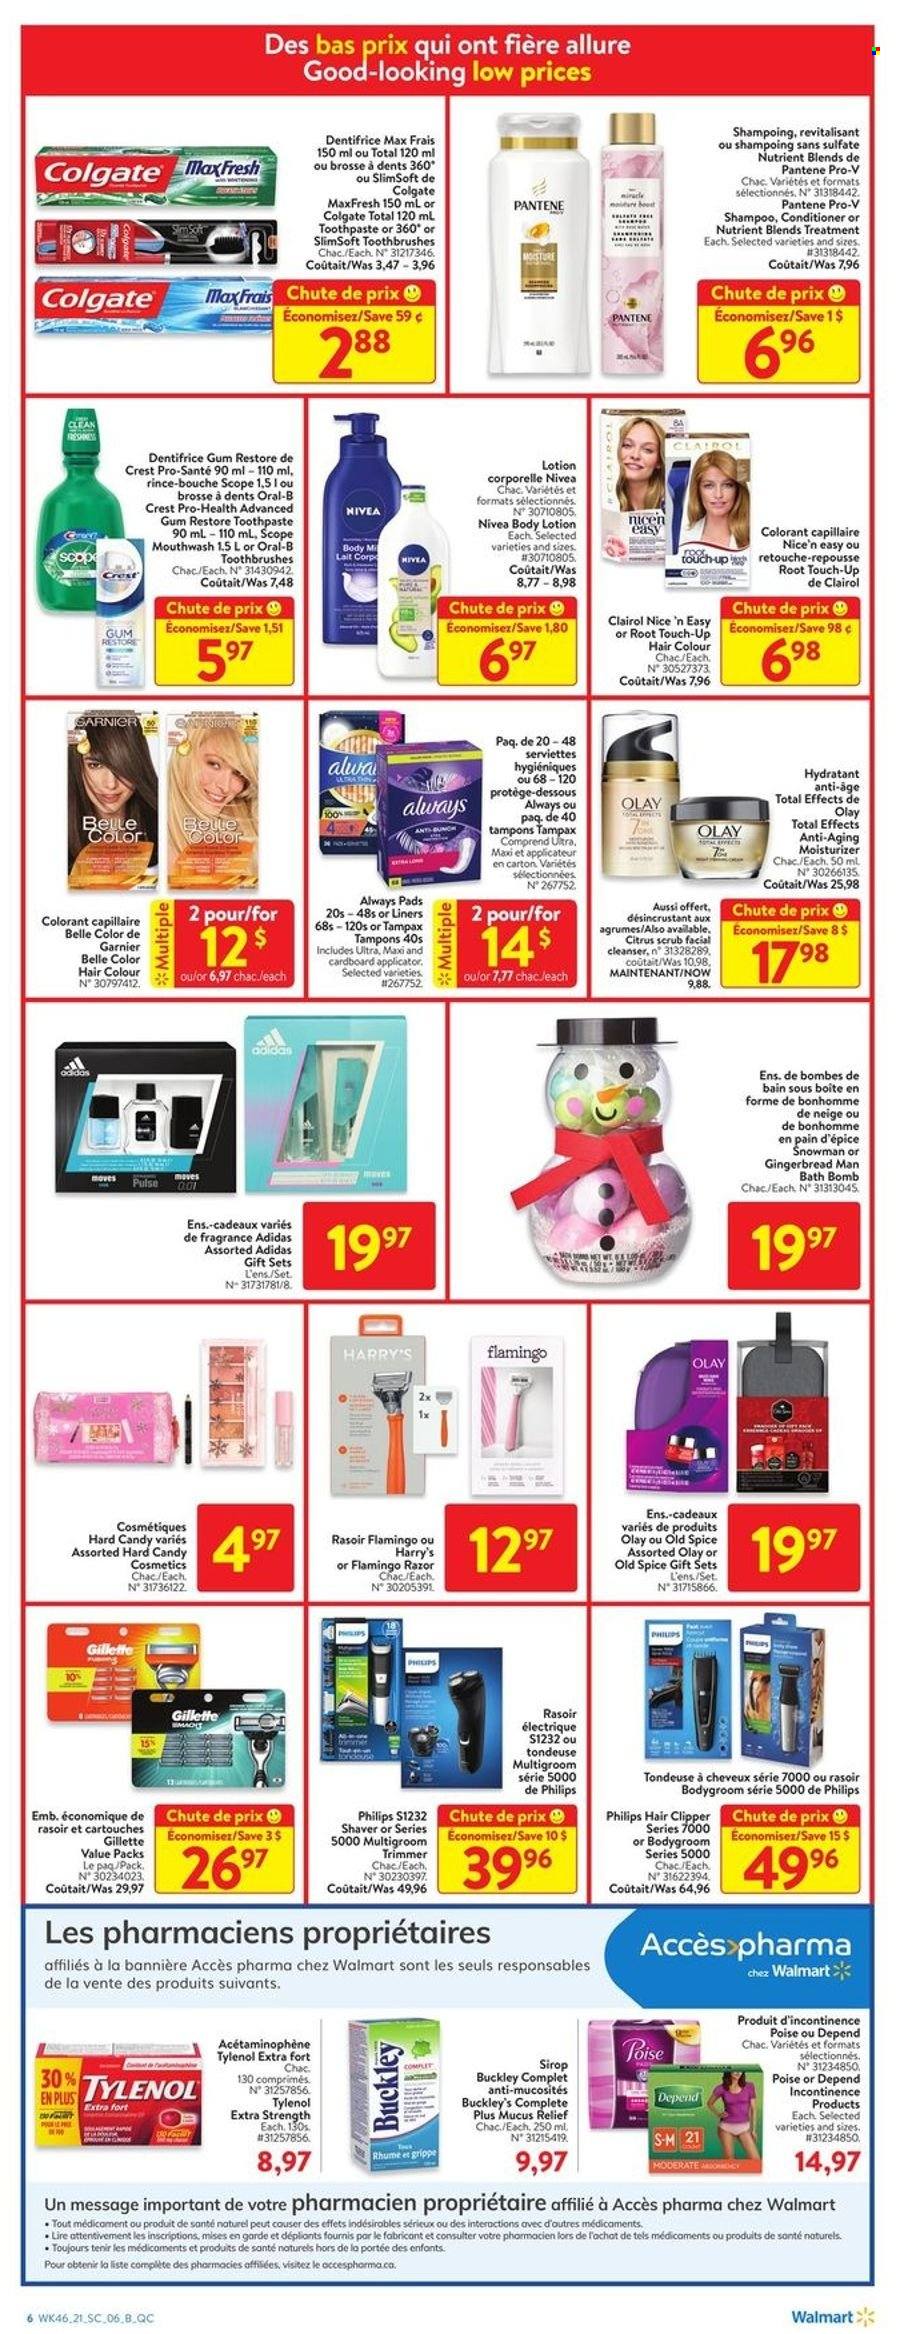 thumbnail - Walmart Flyer - December 09, 2021 - December 15, 2021 - Sales products - Philips, gingerbread, spice, bath bomb, toothpaste, mouthwash, Crest, Always pads, tampons, cleanser, moisturizer, Olay, Root Touch-Up, Clairol, conditioner, hair color, body lotion, fragrance, razor, shaver, trimmer, hair clipper, scope, Tylenol, Adidas, Colgate, Garnier, Gillette, shampoo, Tampax, Pantene, Nivea, Old Spice, Oral-B. Page 9.